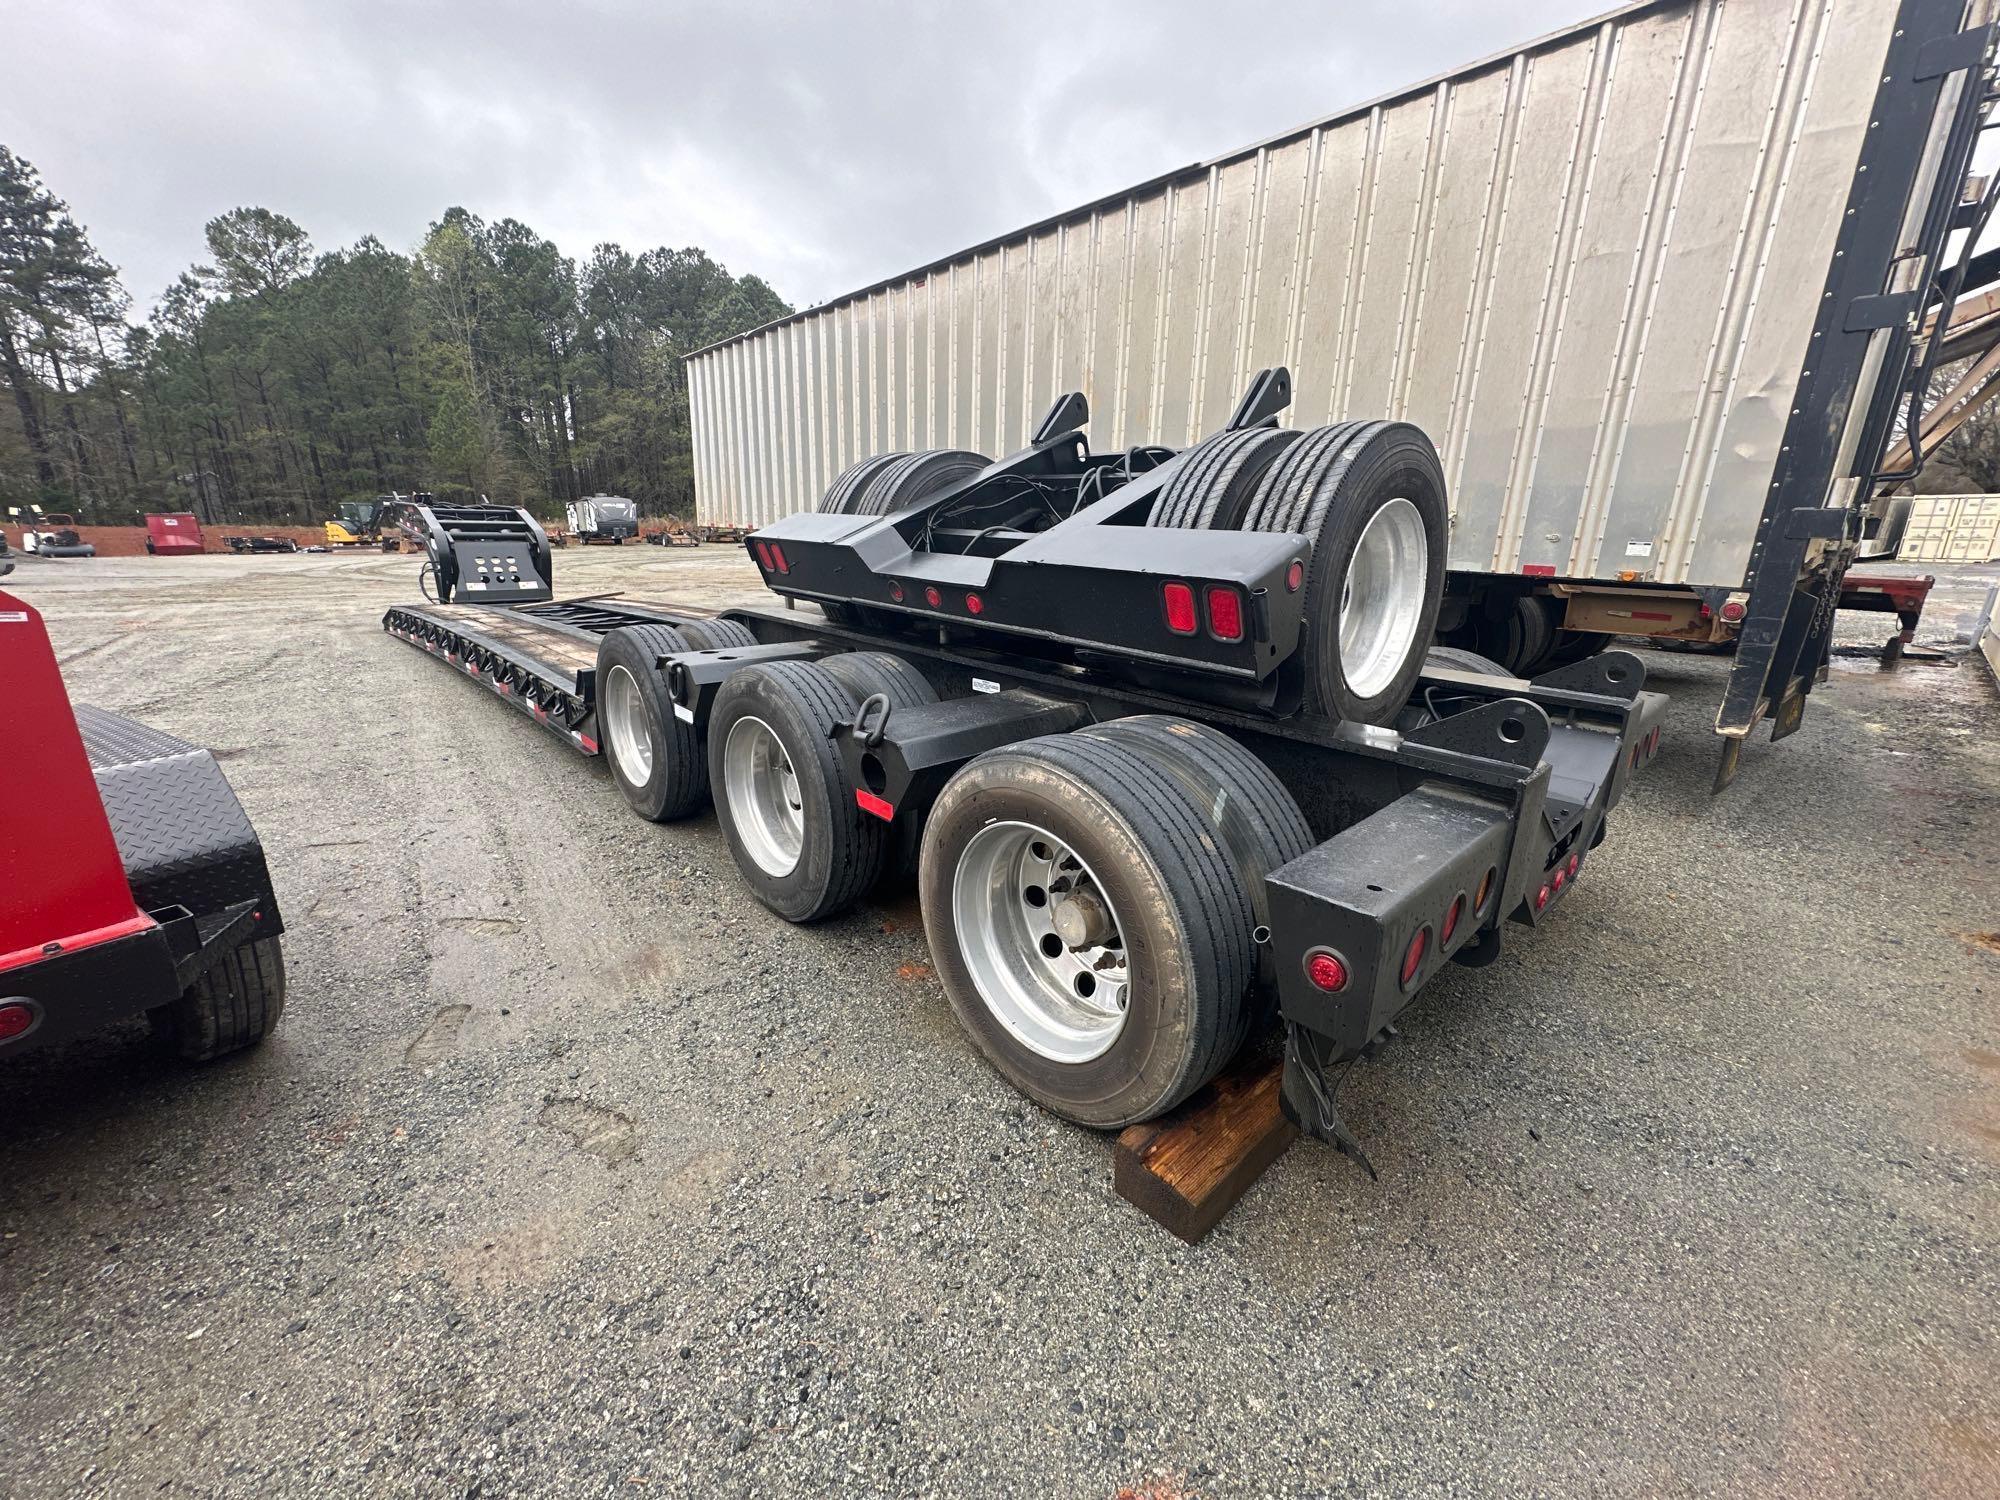 2015 FONTAINE MAGNITUDE 55H 55 TON TRI/A LOWBOY WITH 4TH STINGER AXLE